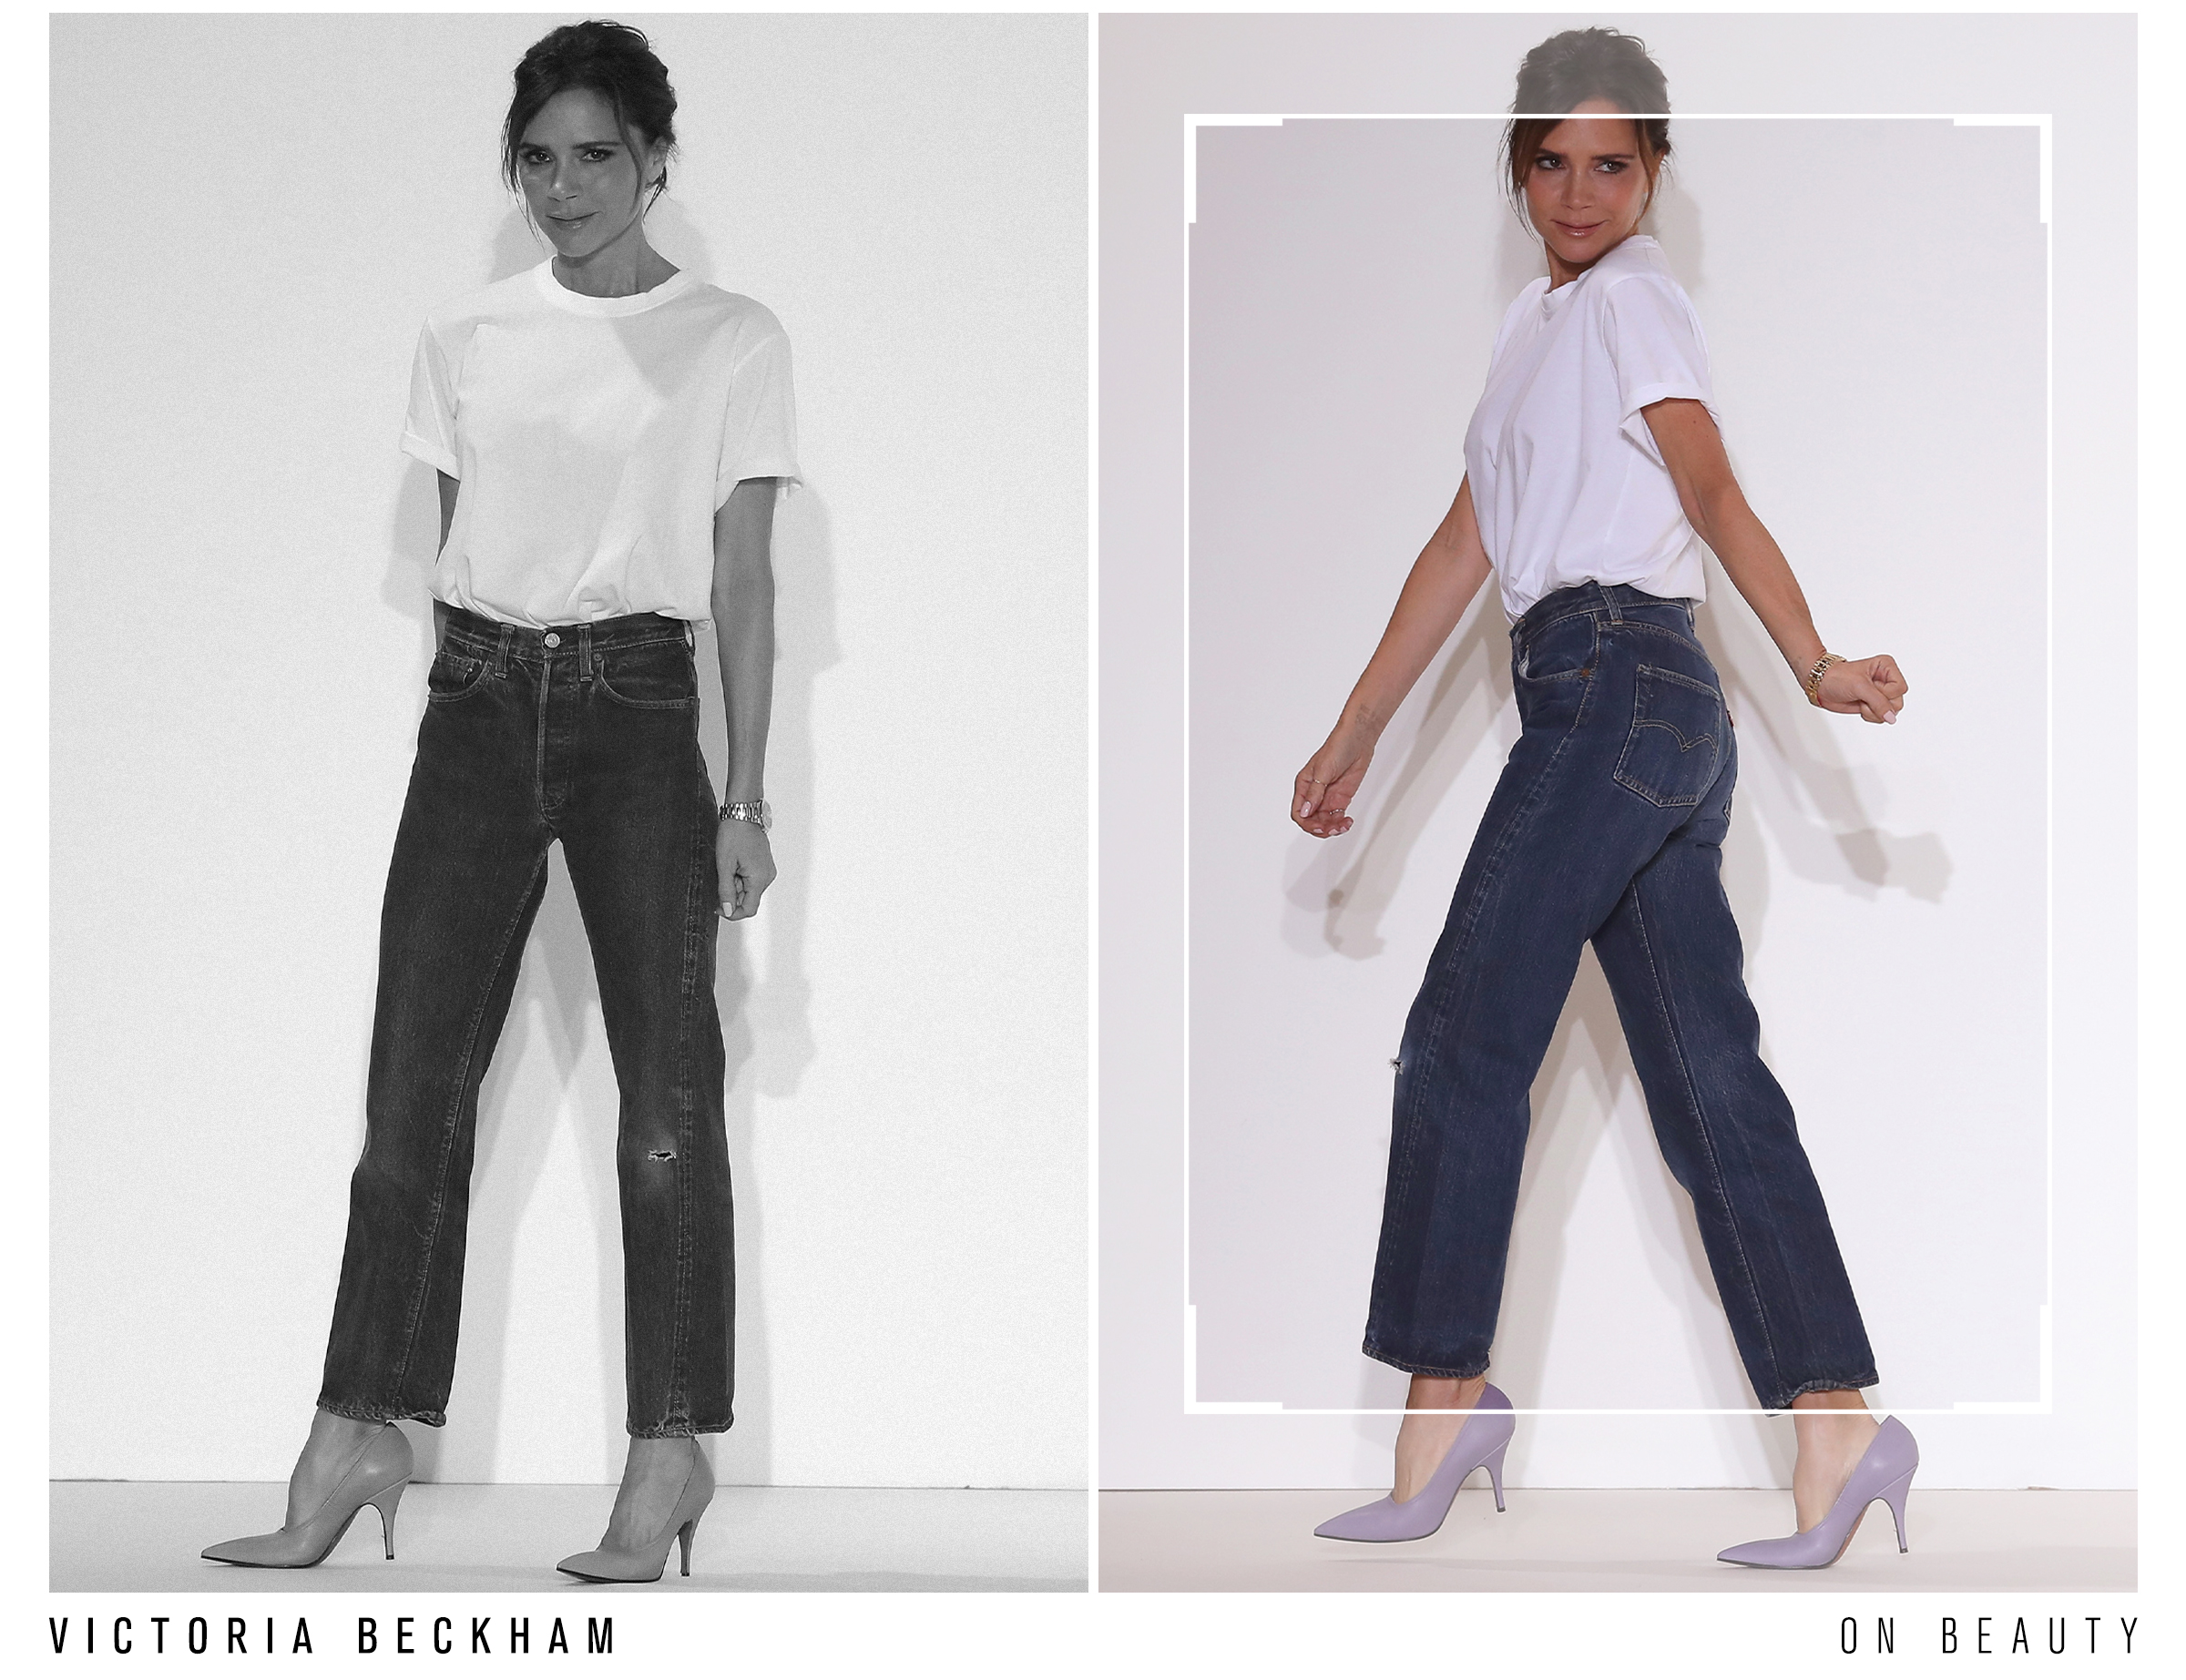 Victoria Beckham Talked Me Through Her Beauty Routine and the Products She Loves